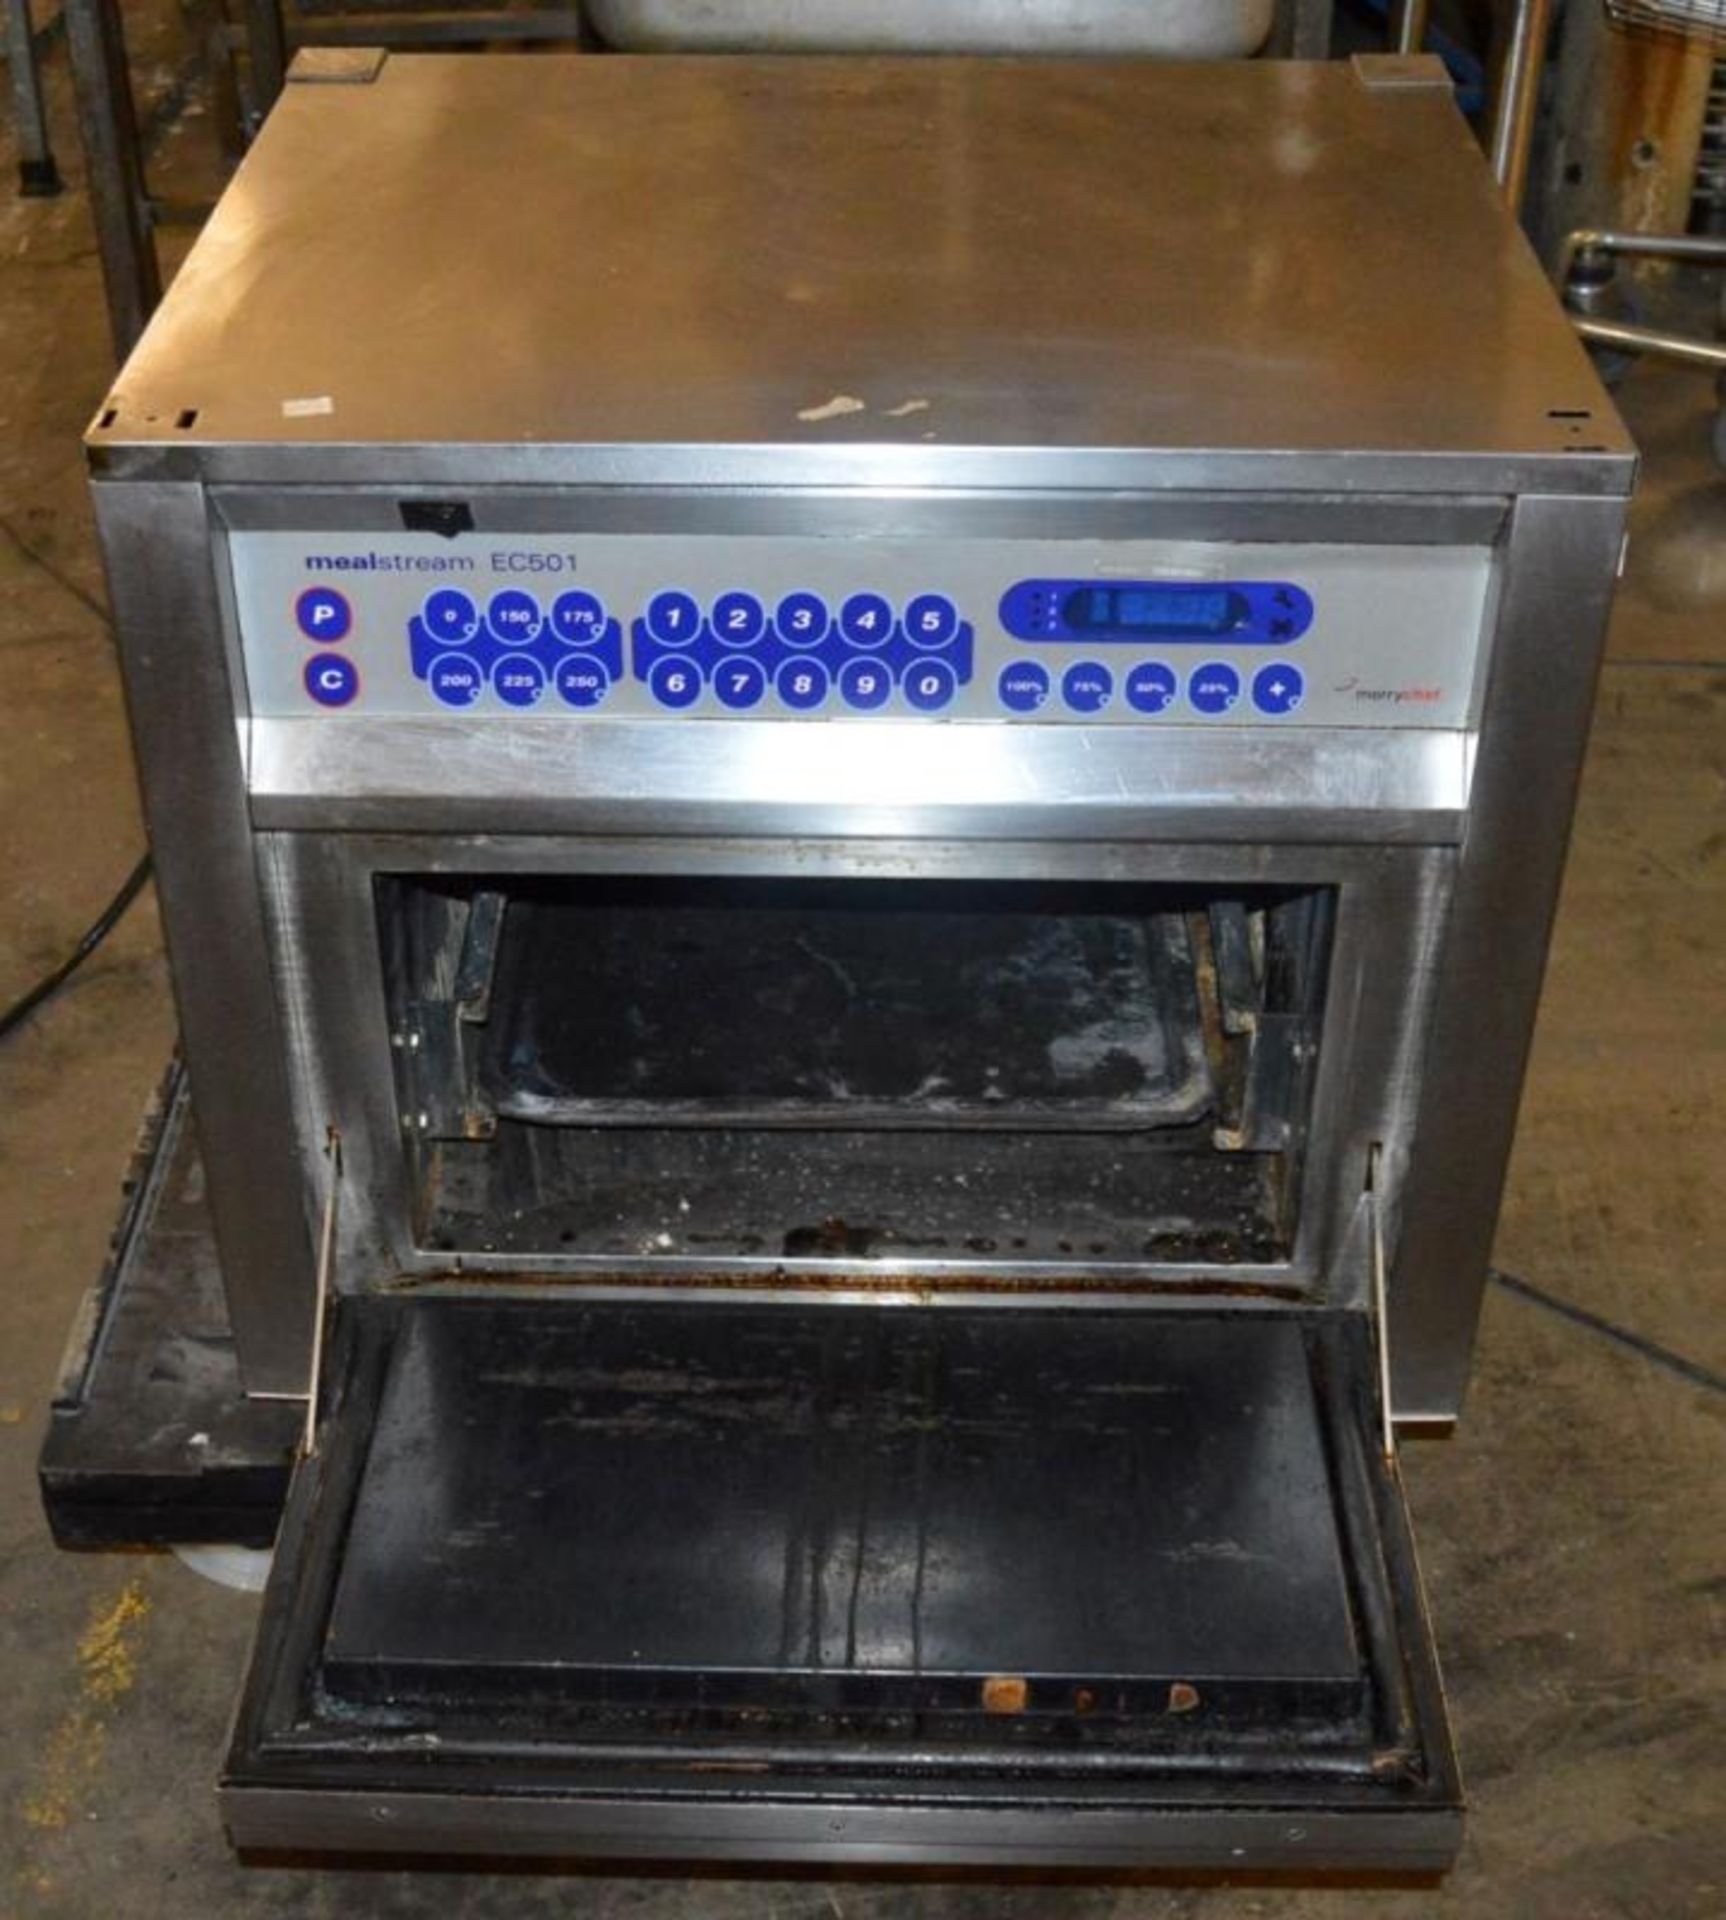 1 x MerryChef Mealstream EC501 Combination Oven - Stainless Steel Finish - CL232 - Ref JP508 - Locat - Image 5 of 6